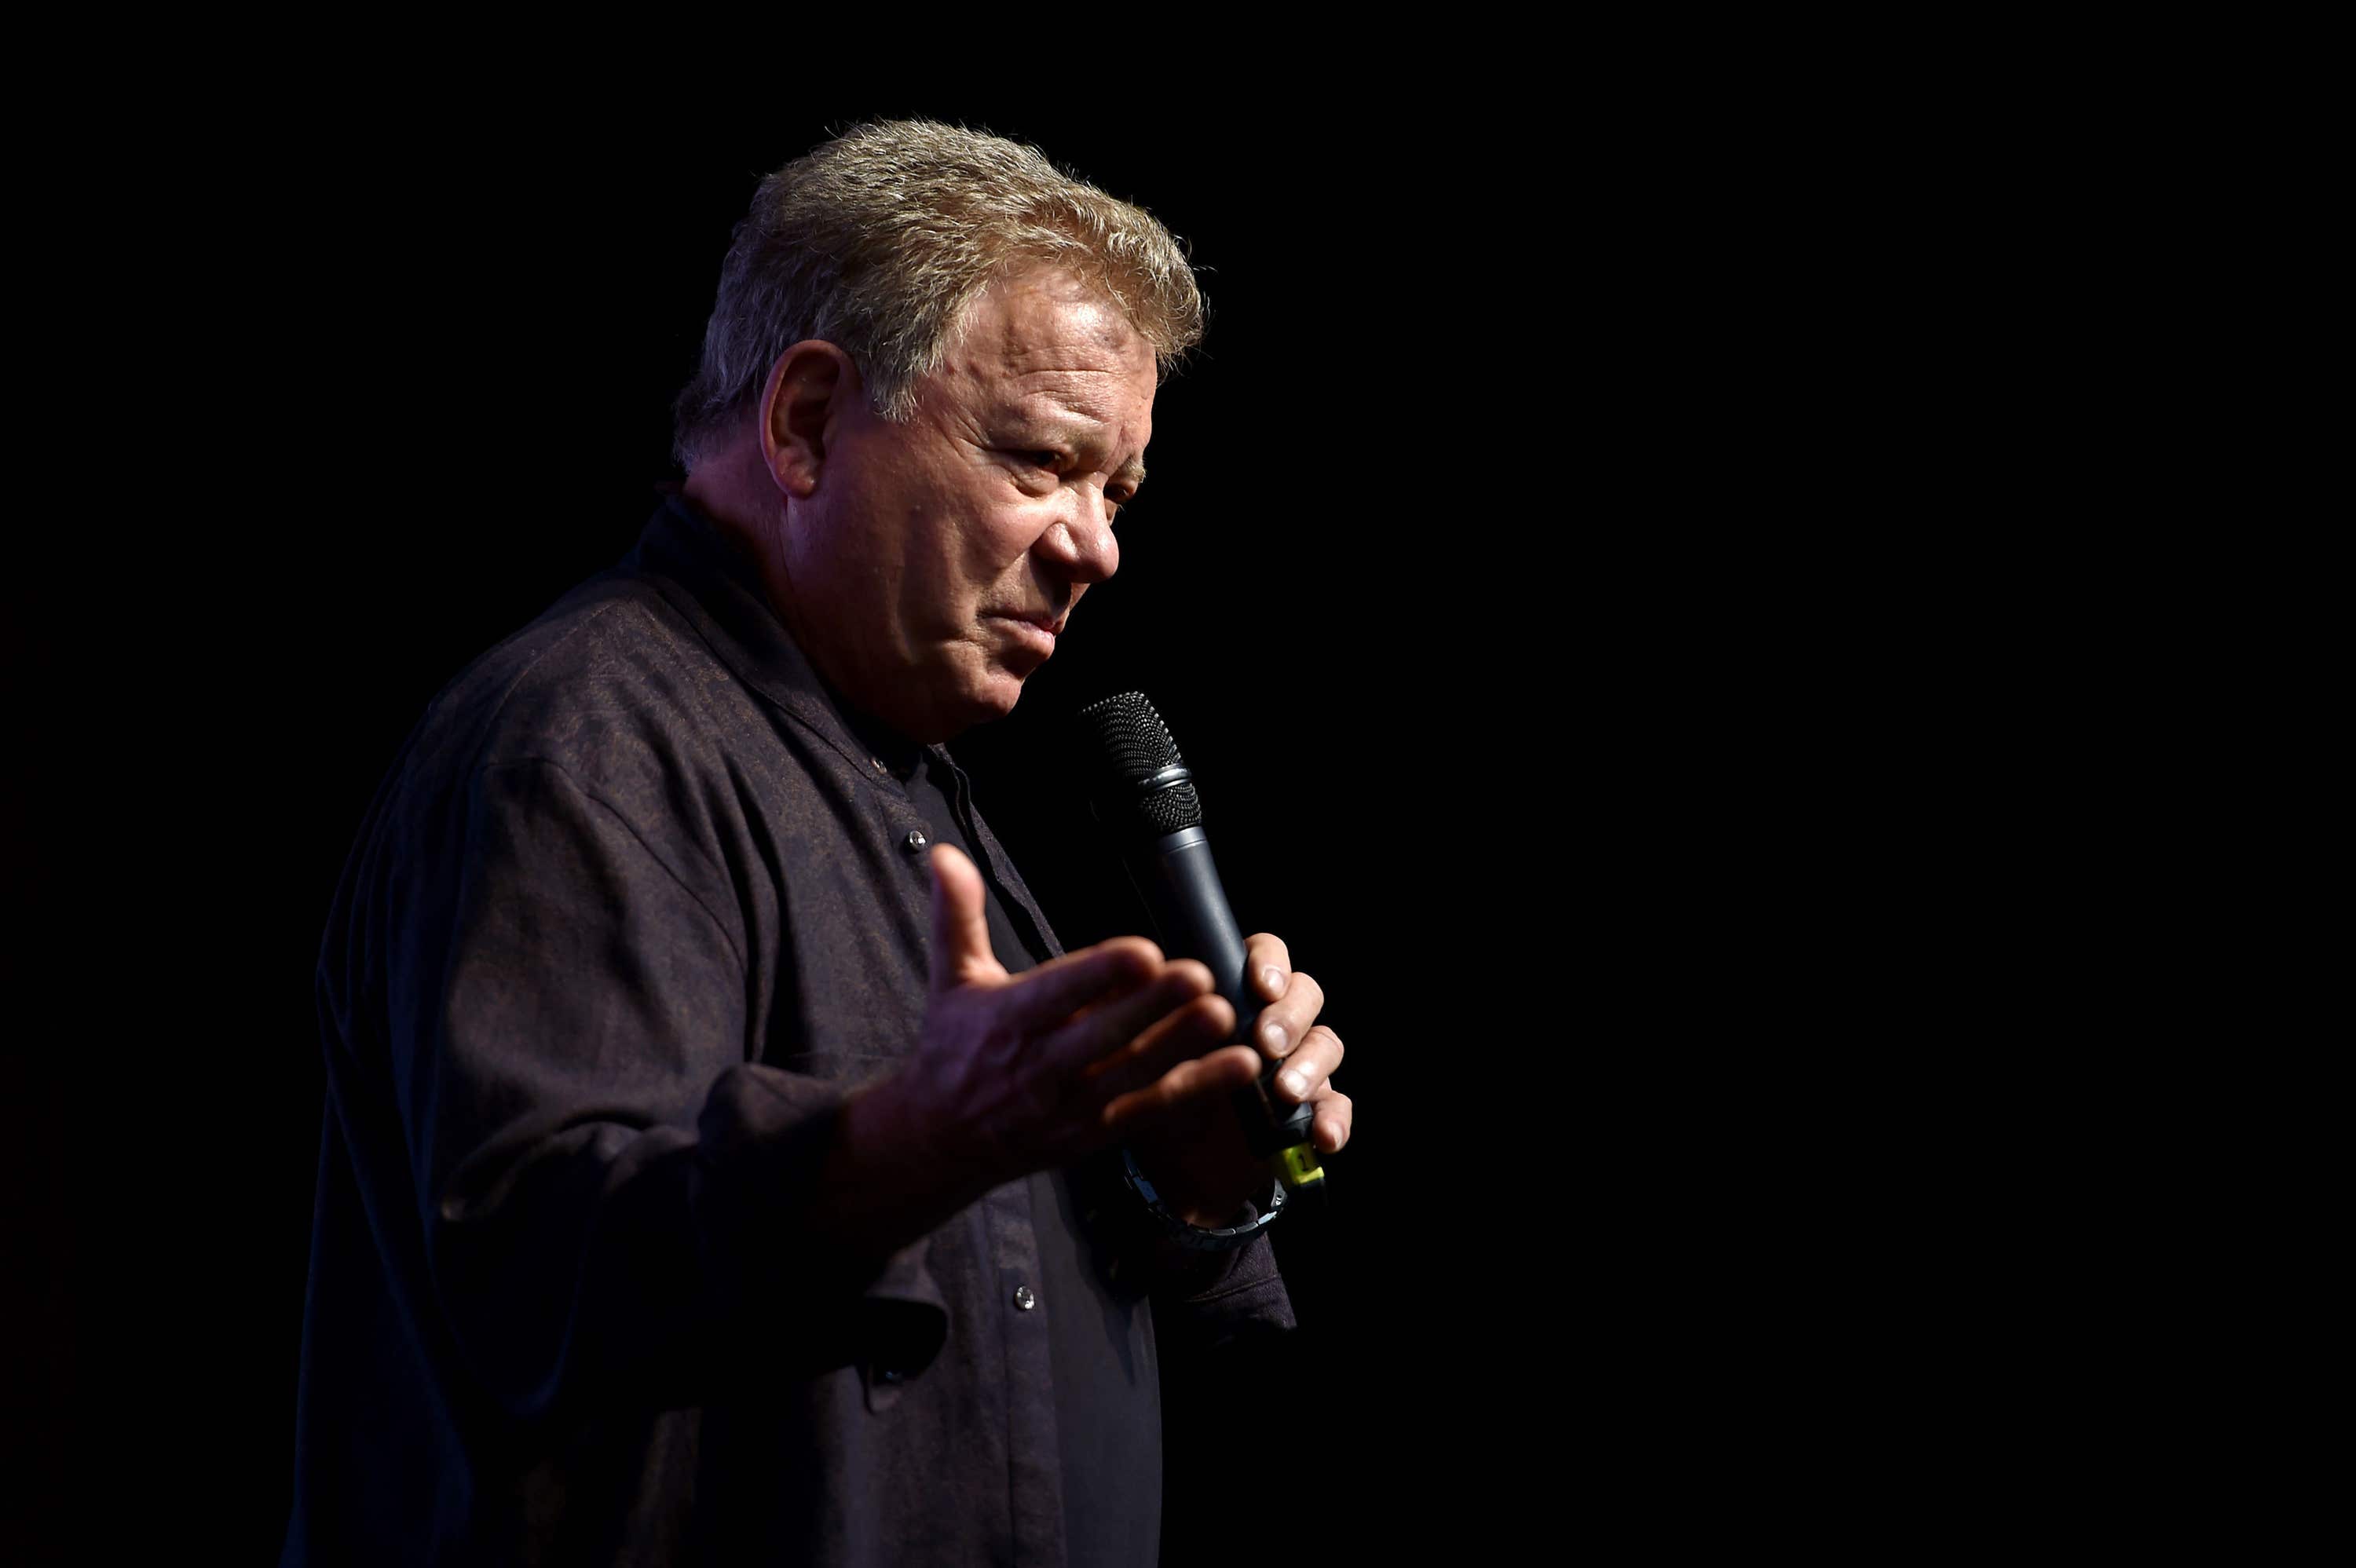 William Shatner played Captain Kirk in Star Trek: The Motion Picture